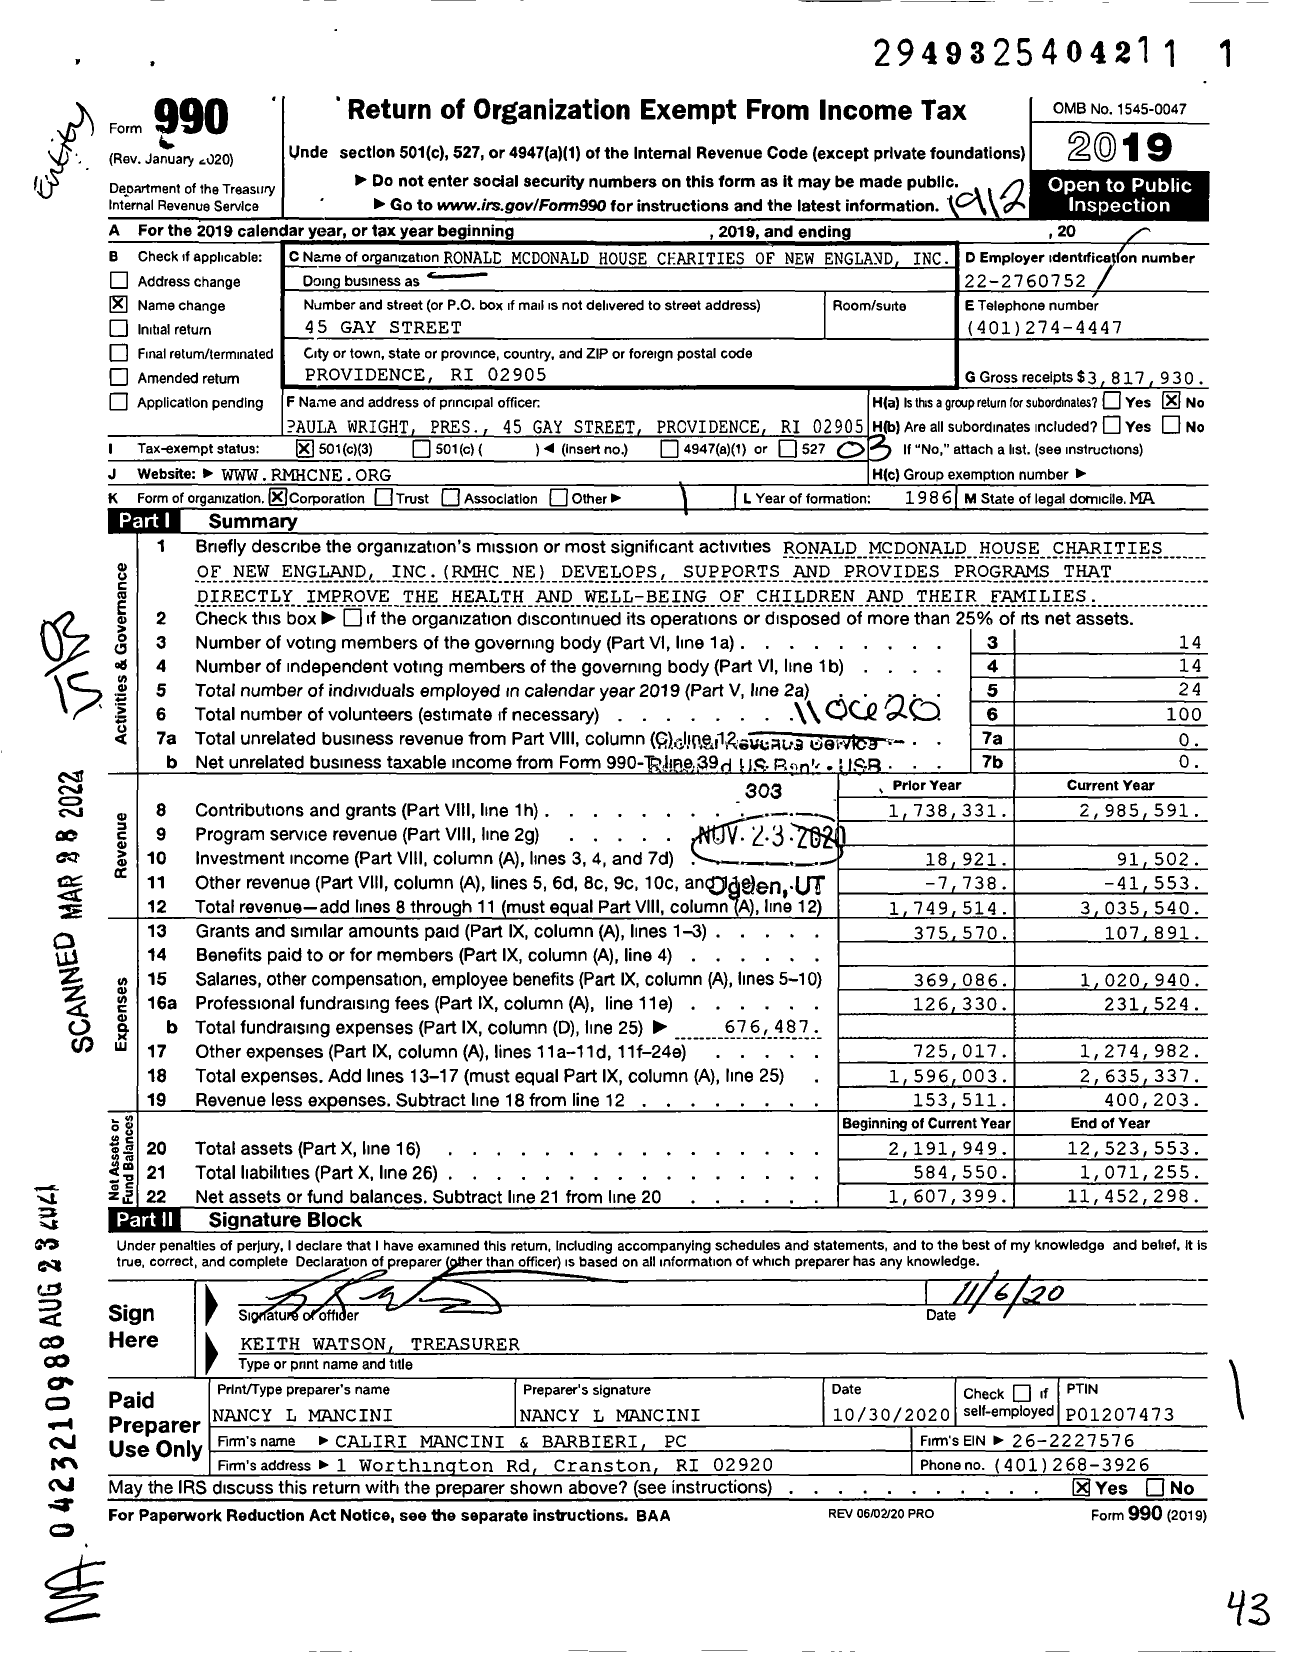 Image of first page of 2019 Form 990 for Ronald Mcdonald House Charities of New England